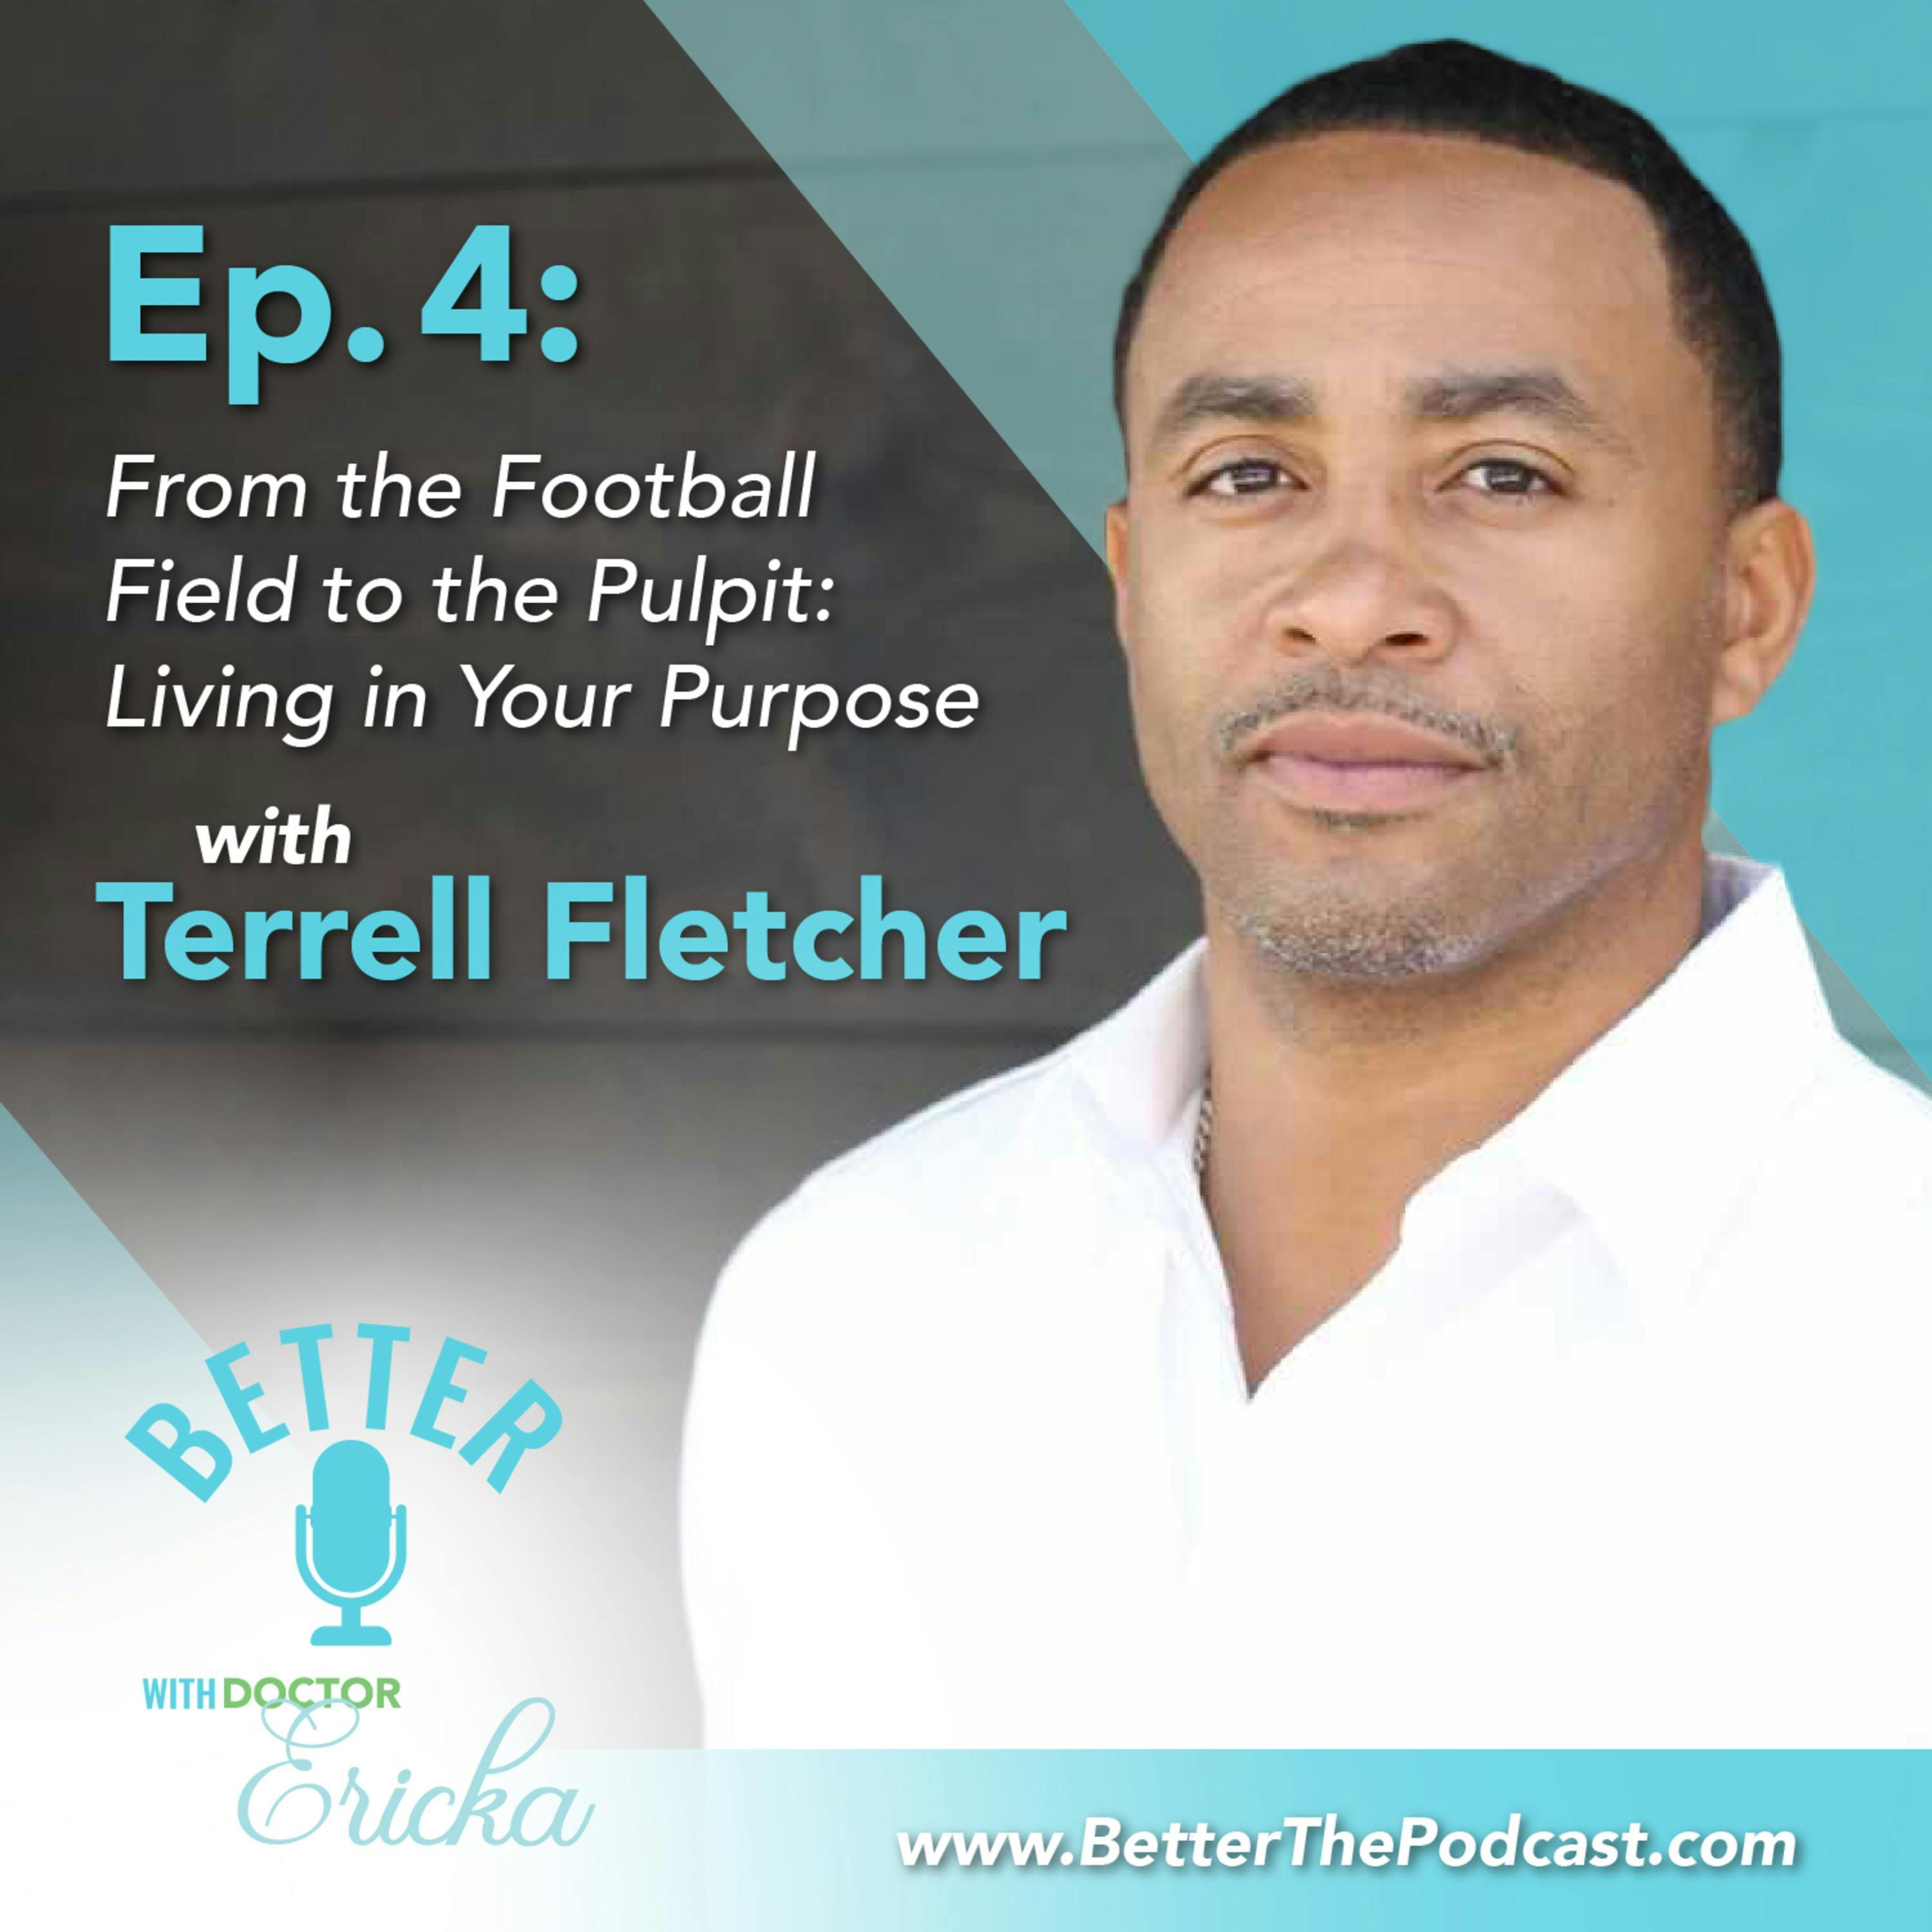 From the Football Field to the Pulpit: Living in Your Purpose with Terrell Fletcher